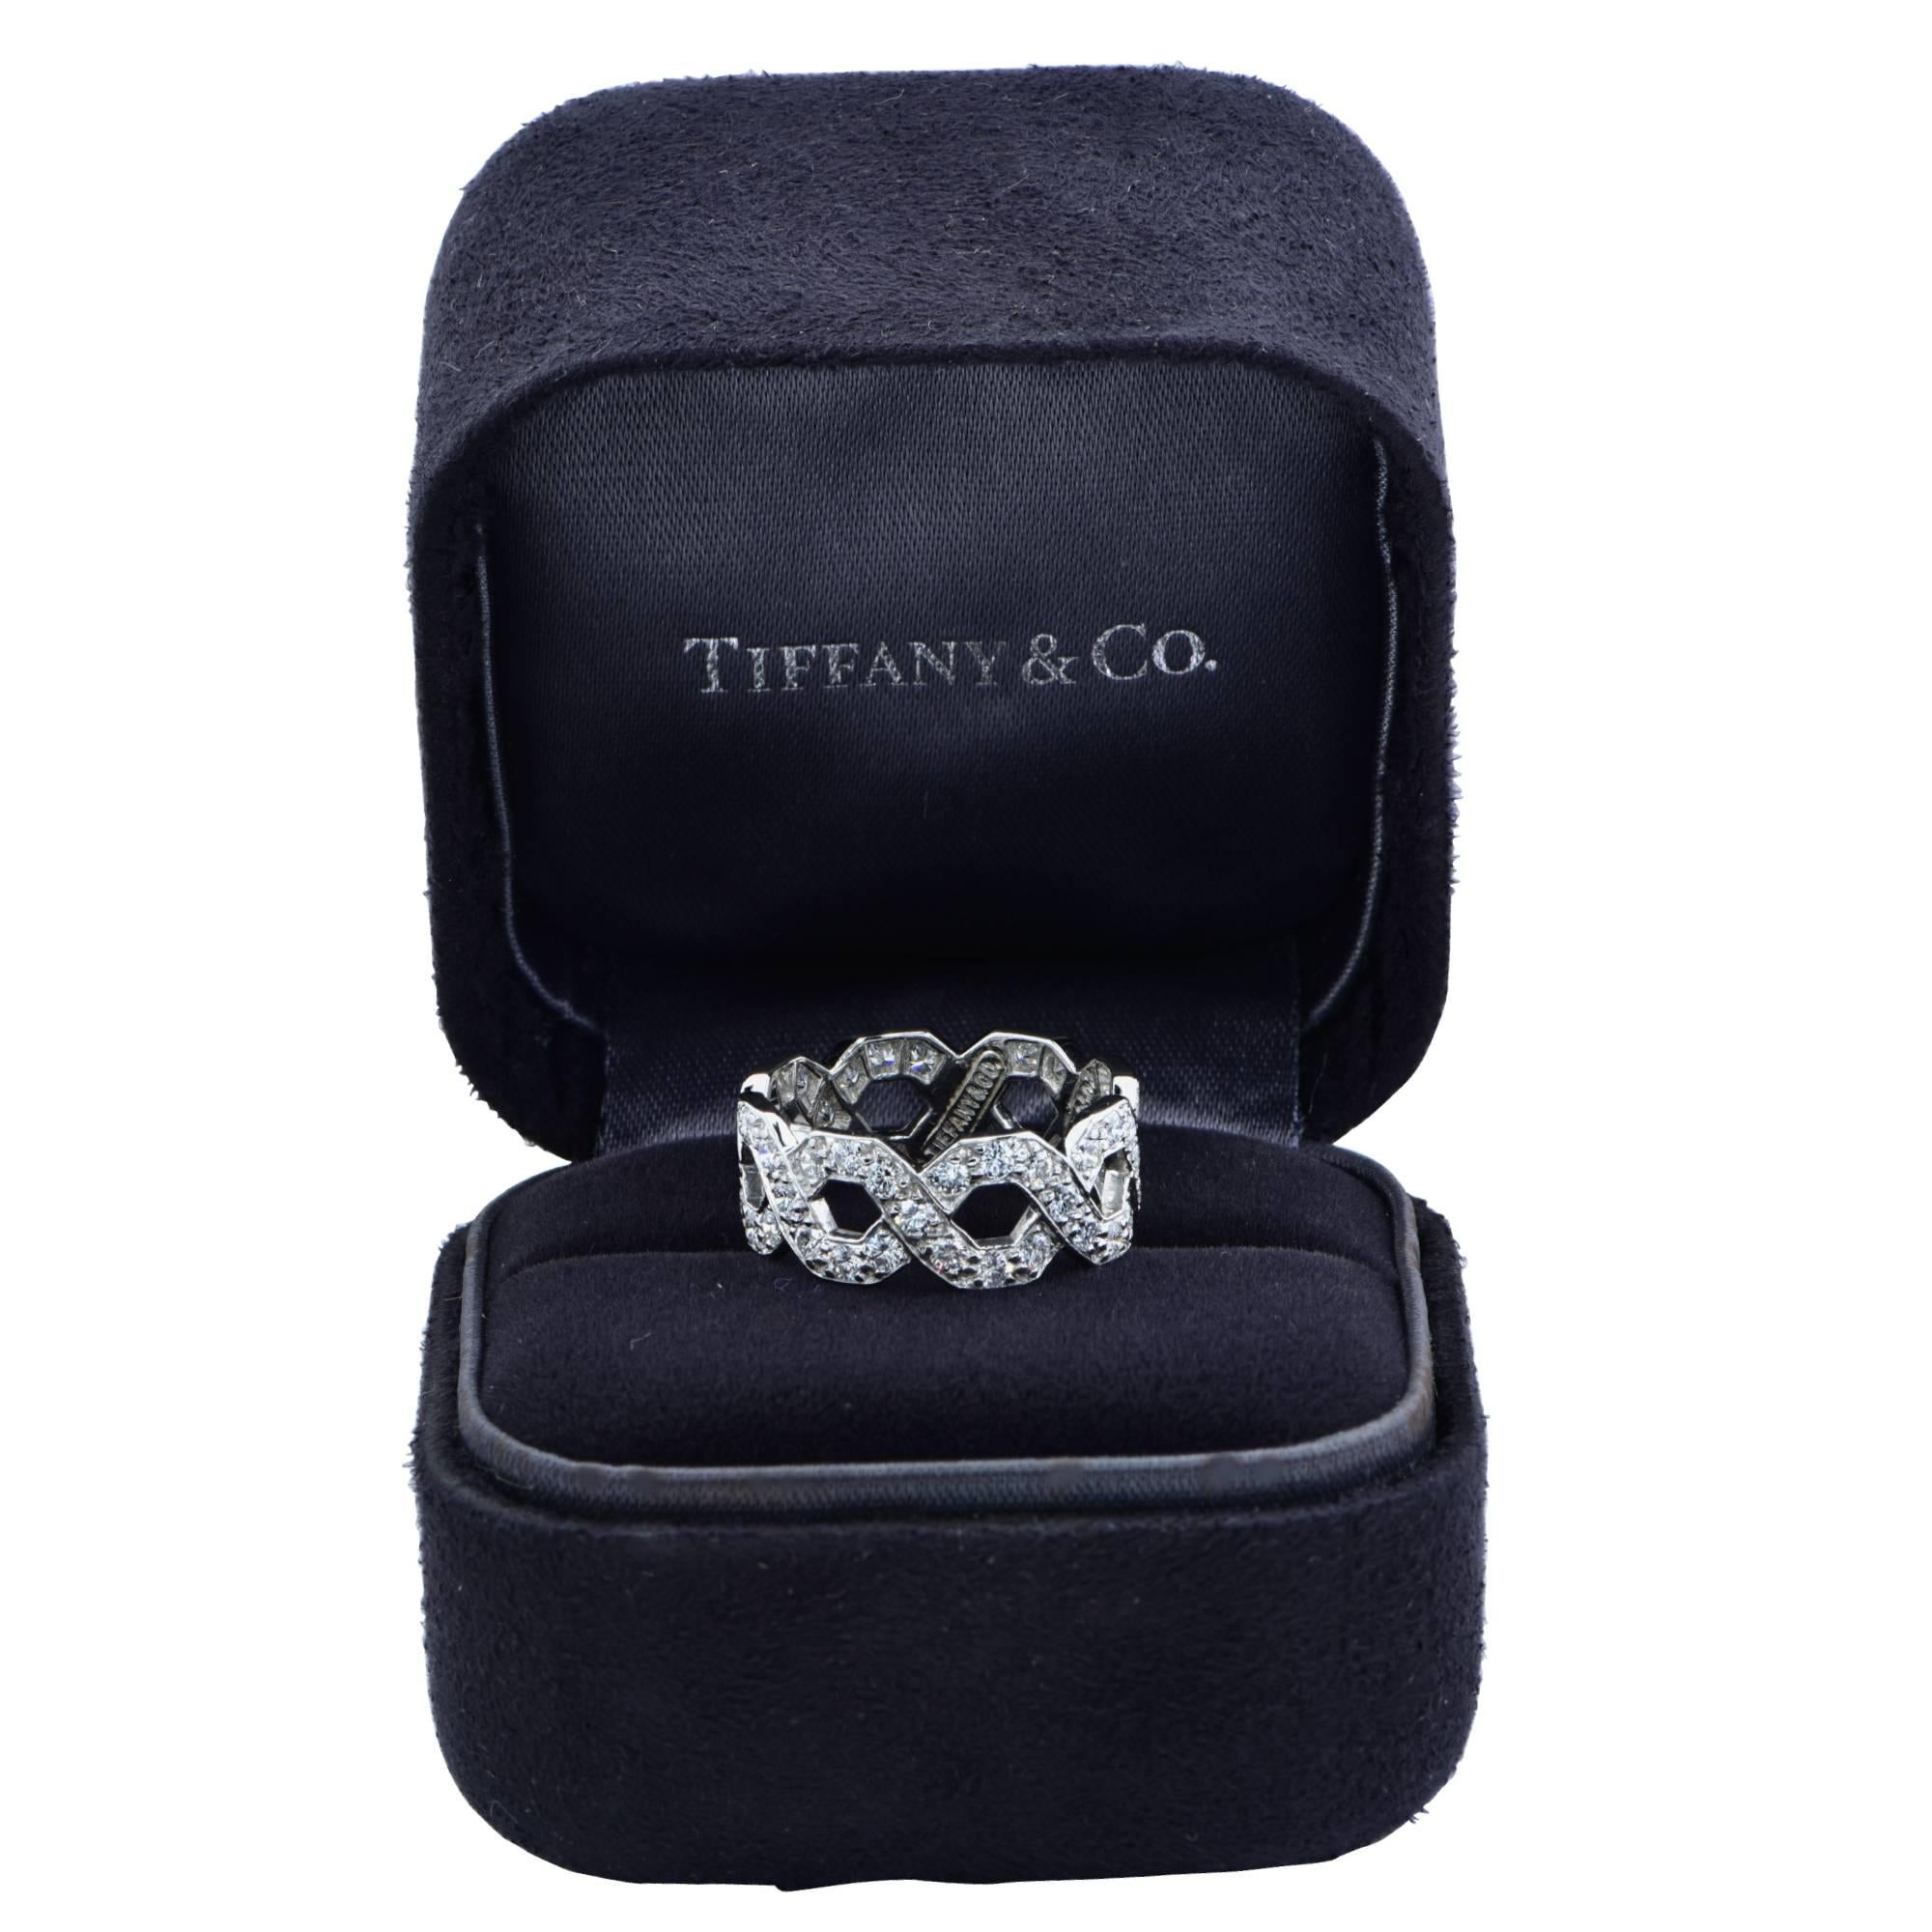 Tiffany & Co. Hexagonal Link diamond ring crafted in Platinum featuring 56 Round brilliant cut diamonds weighing approximately 1.70 carats total, F color, VVS-VS clarity, set in a hexagonal design. This elegant ring is a size 5.75 and measures 7.6